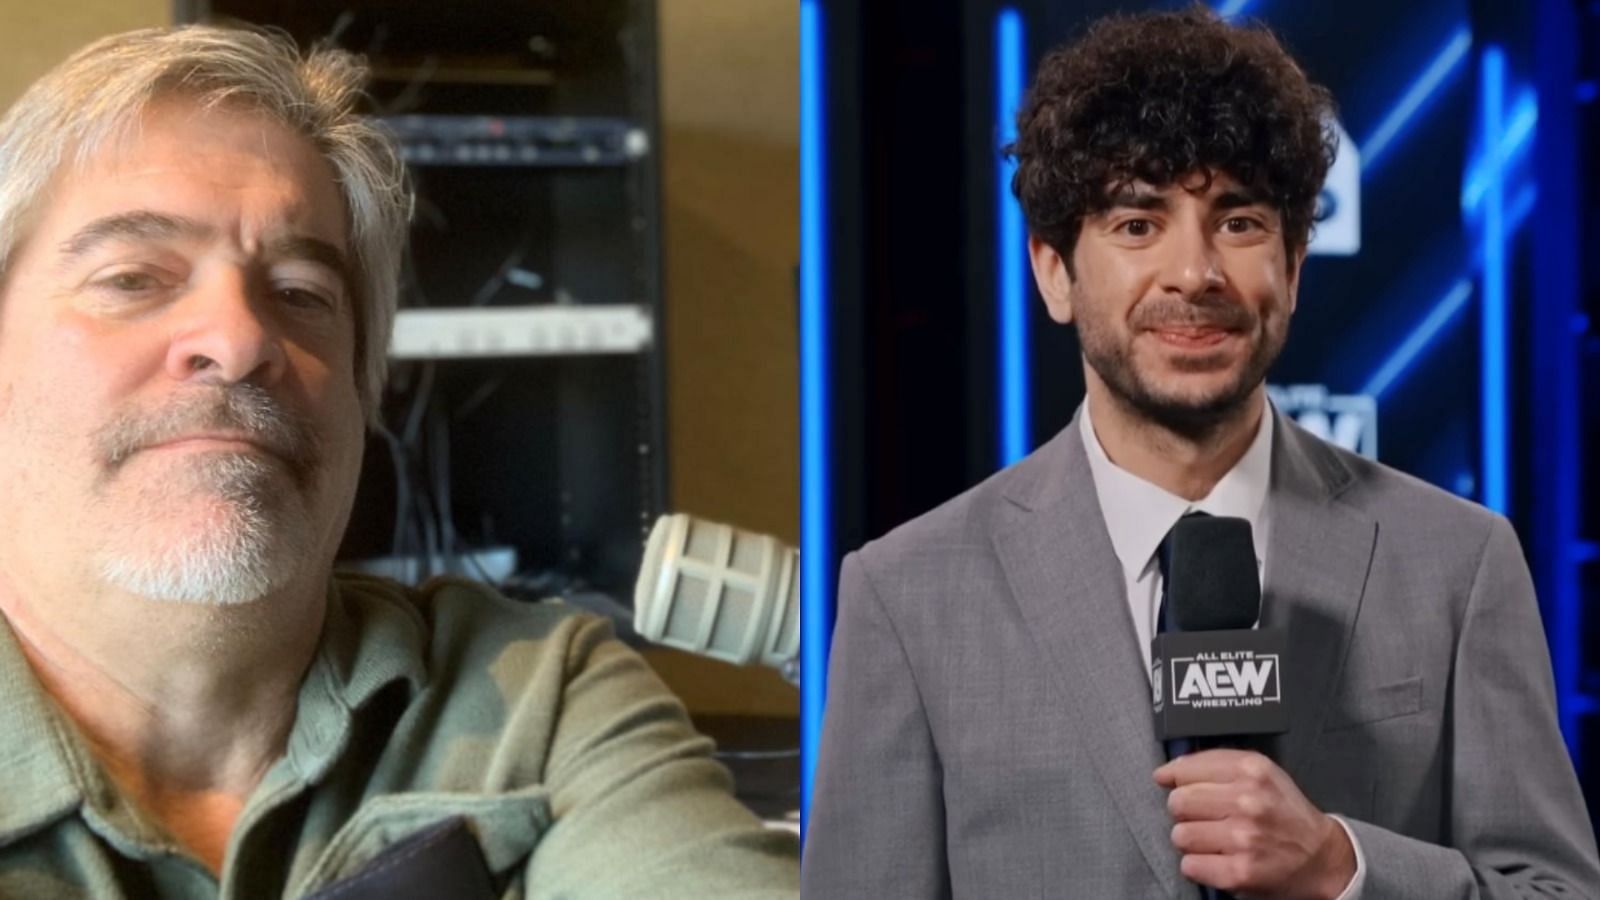 Should AEW hire Vince Russo? [Image credits: Vince Russo